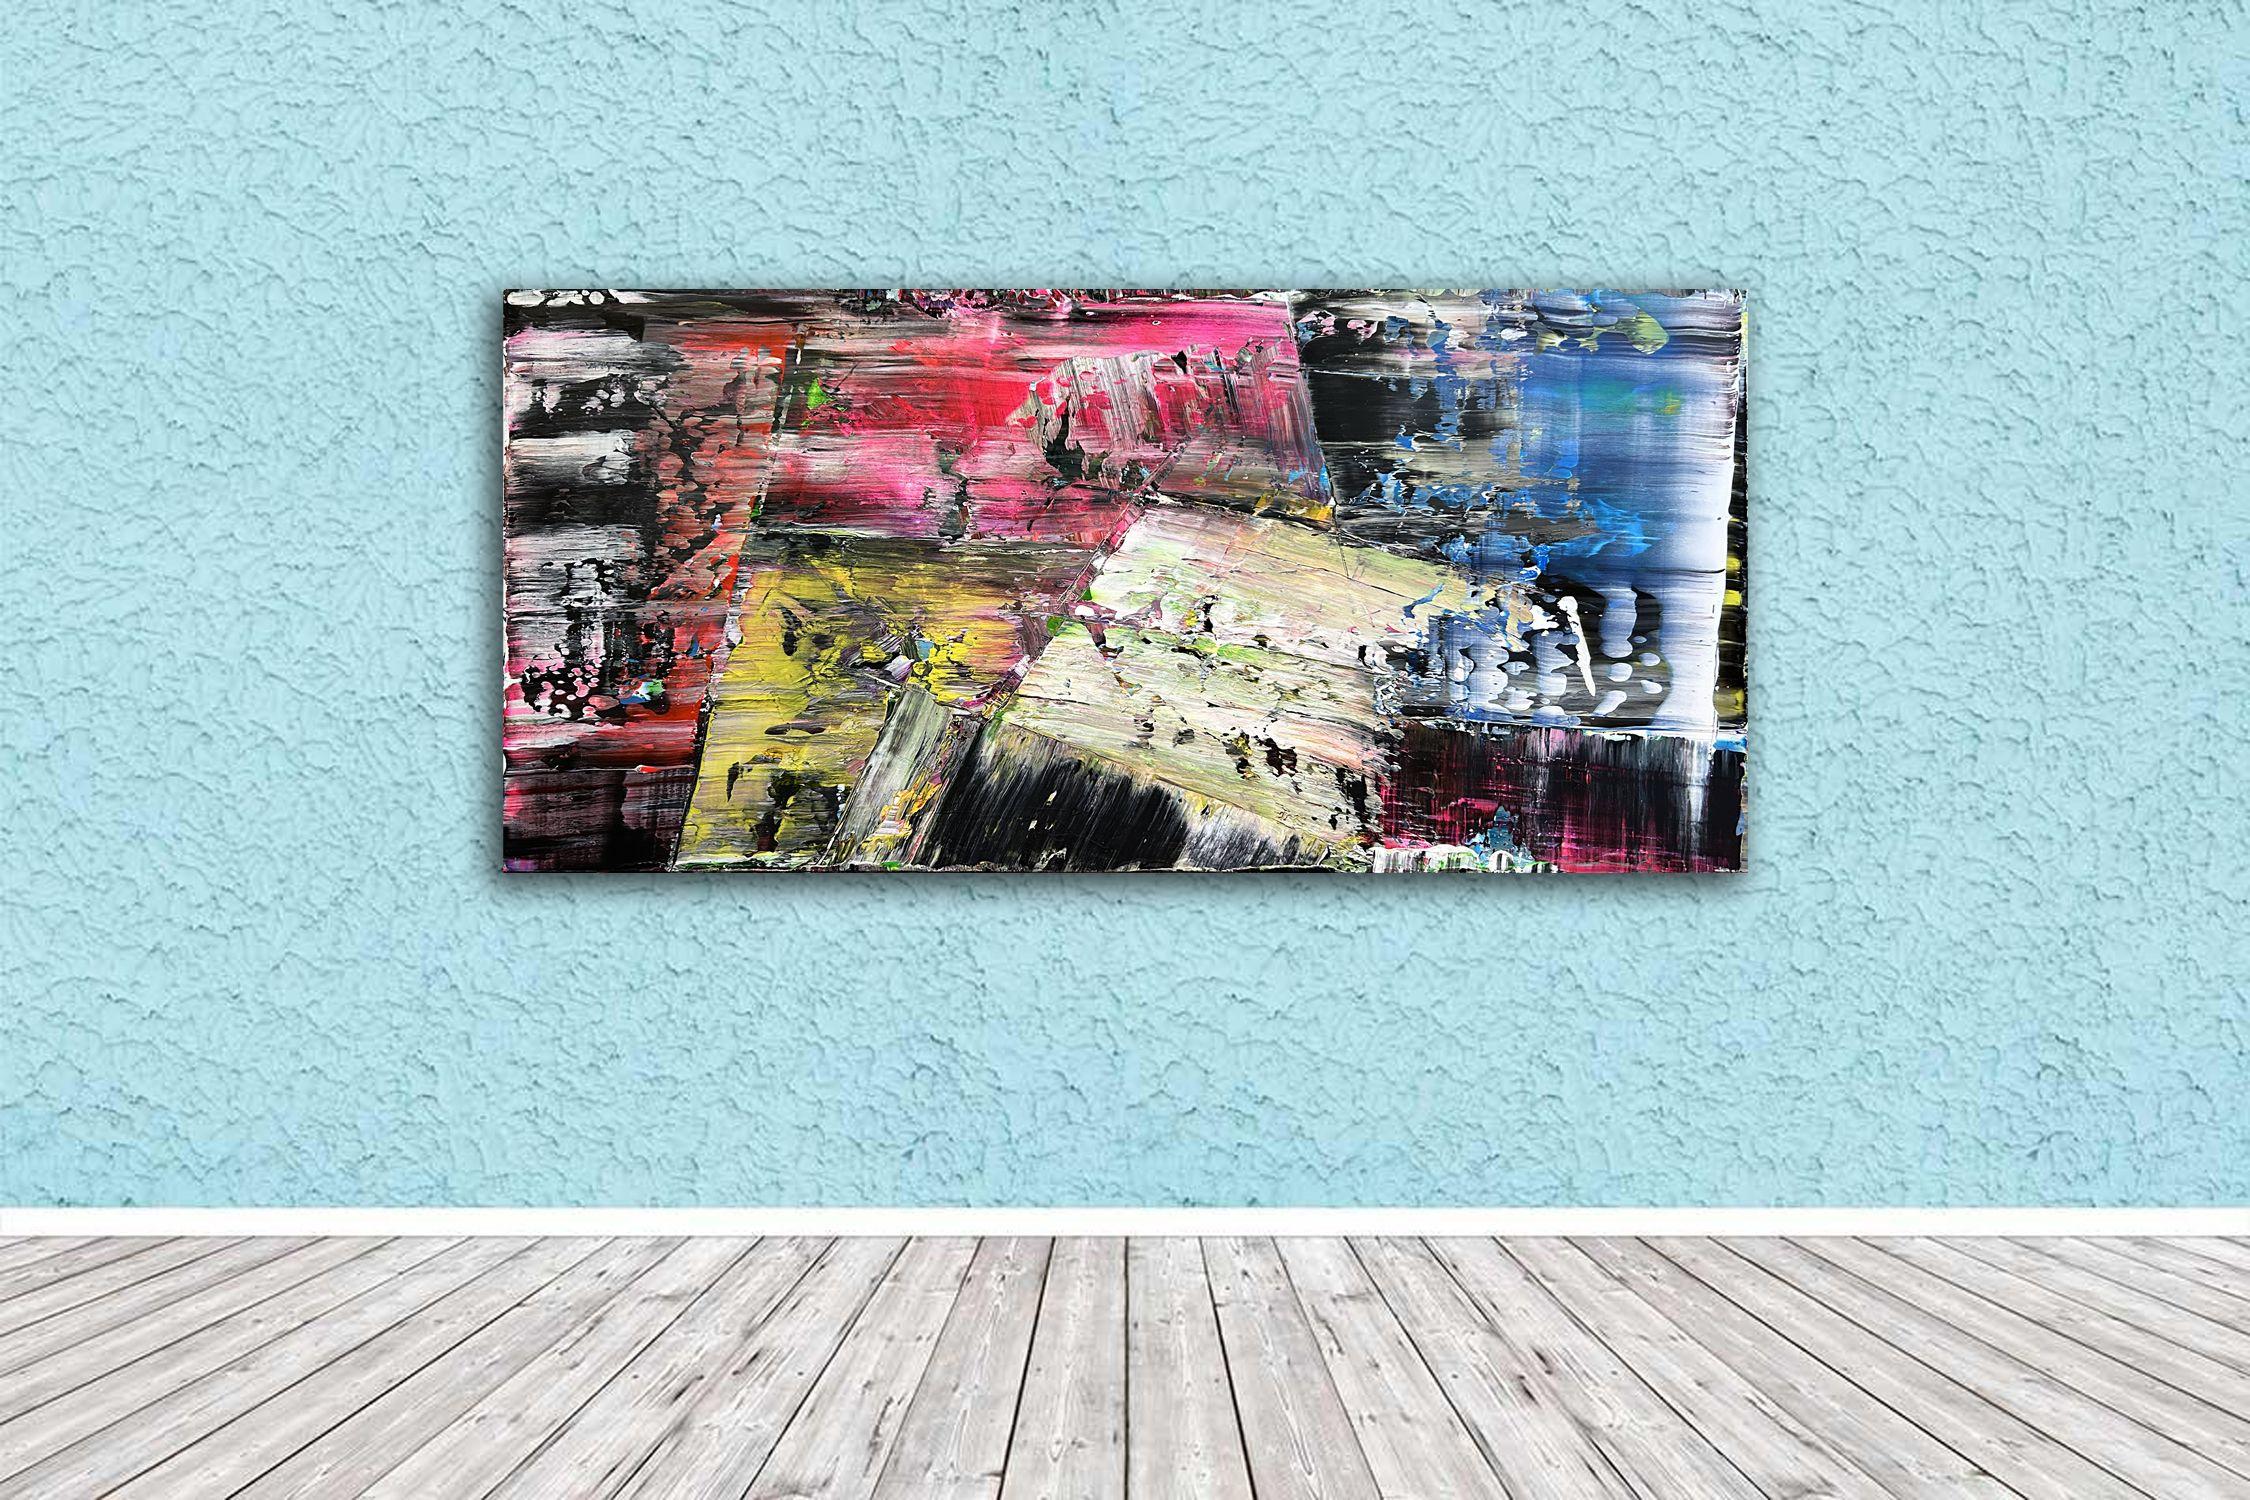 This is a gallery quality, PMS abstract acrylic painting for your home or office. I have continued my obsession with painting works on recycled and reclaimed materials. This not only cuts down on our carbon footprint, but fits with the theme of this